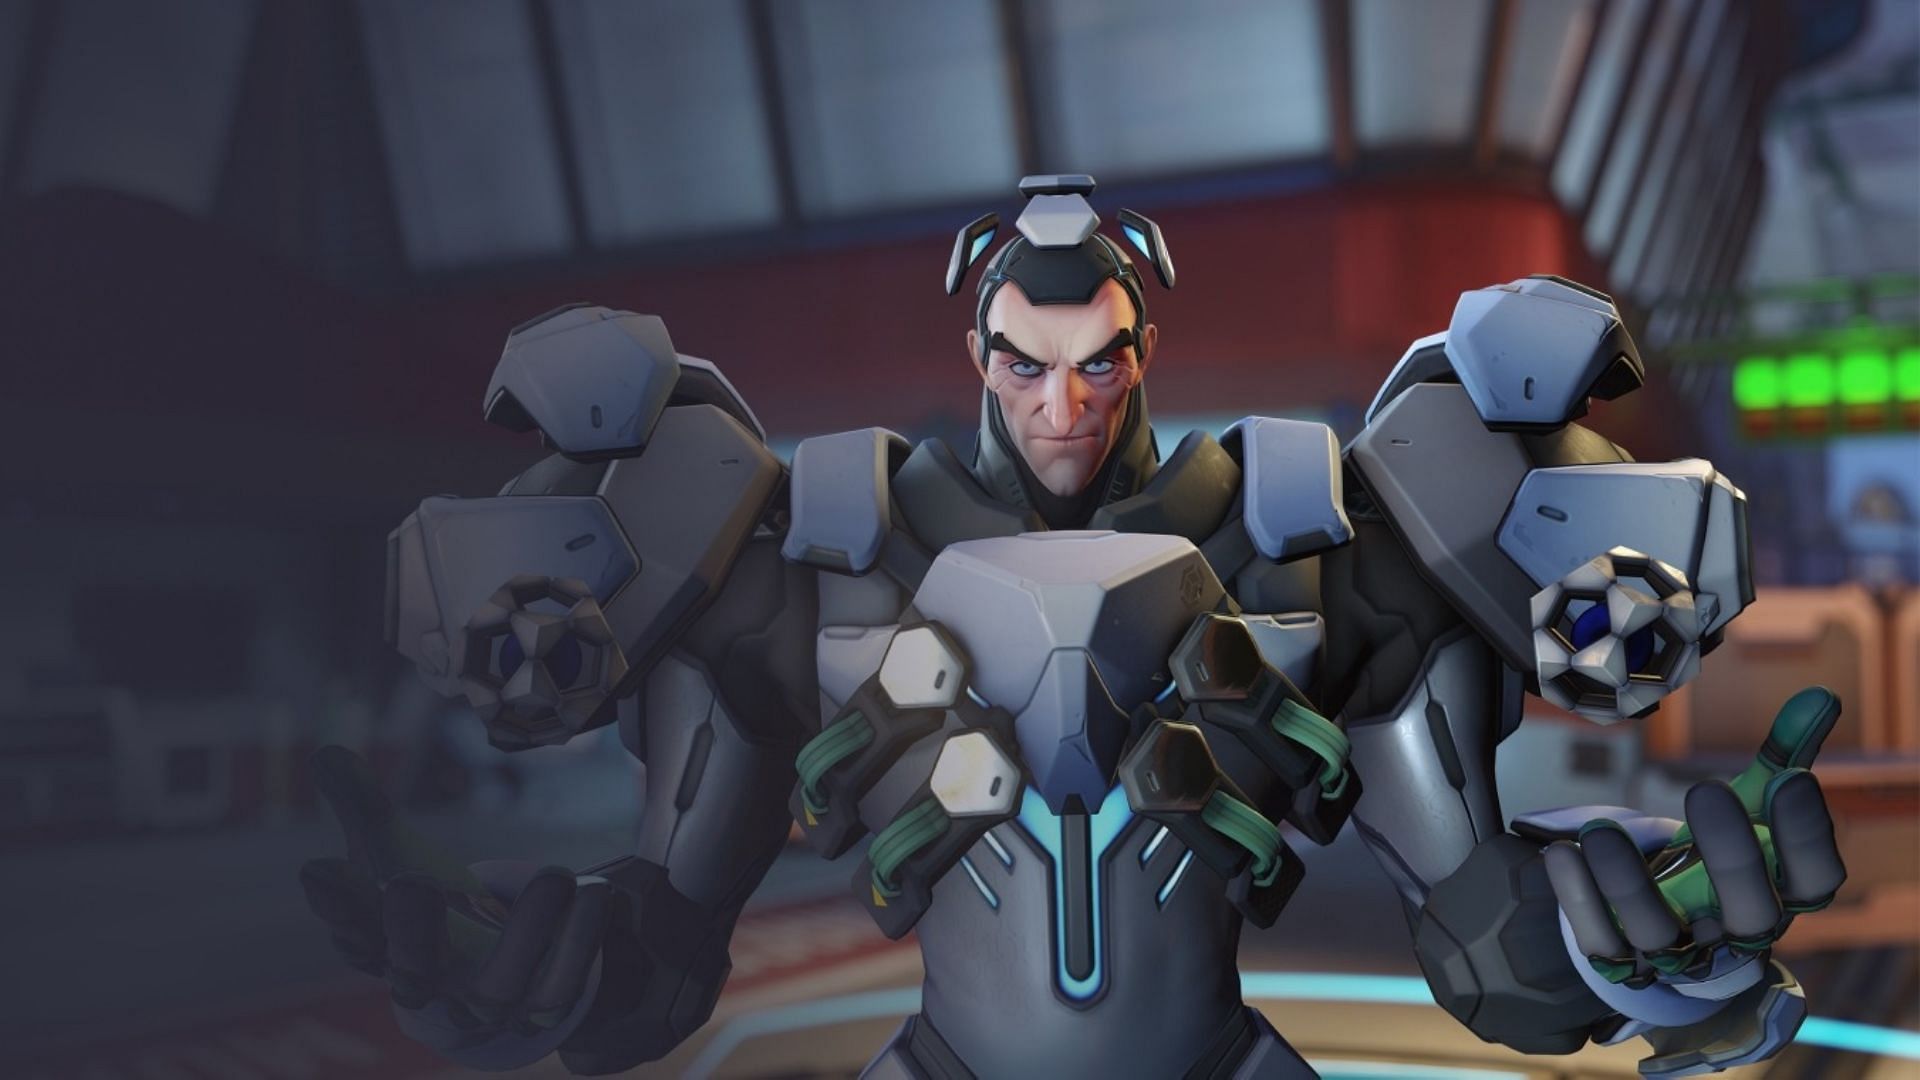 Sigma in Overwatch 2 (Image via Blizzard Entertainment)